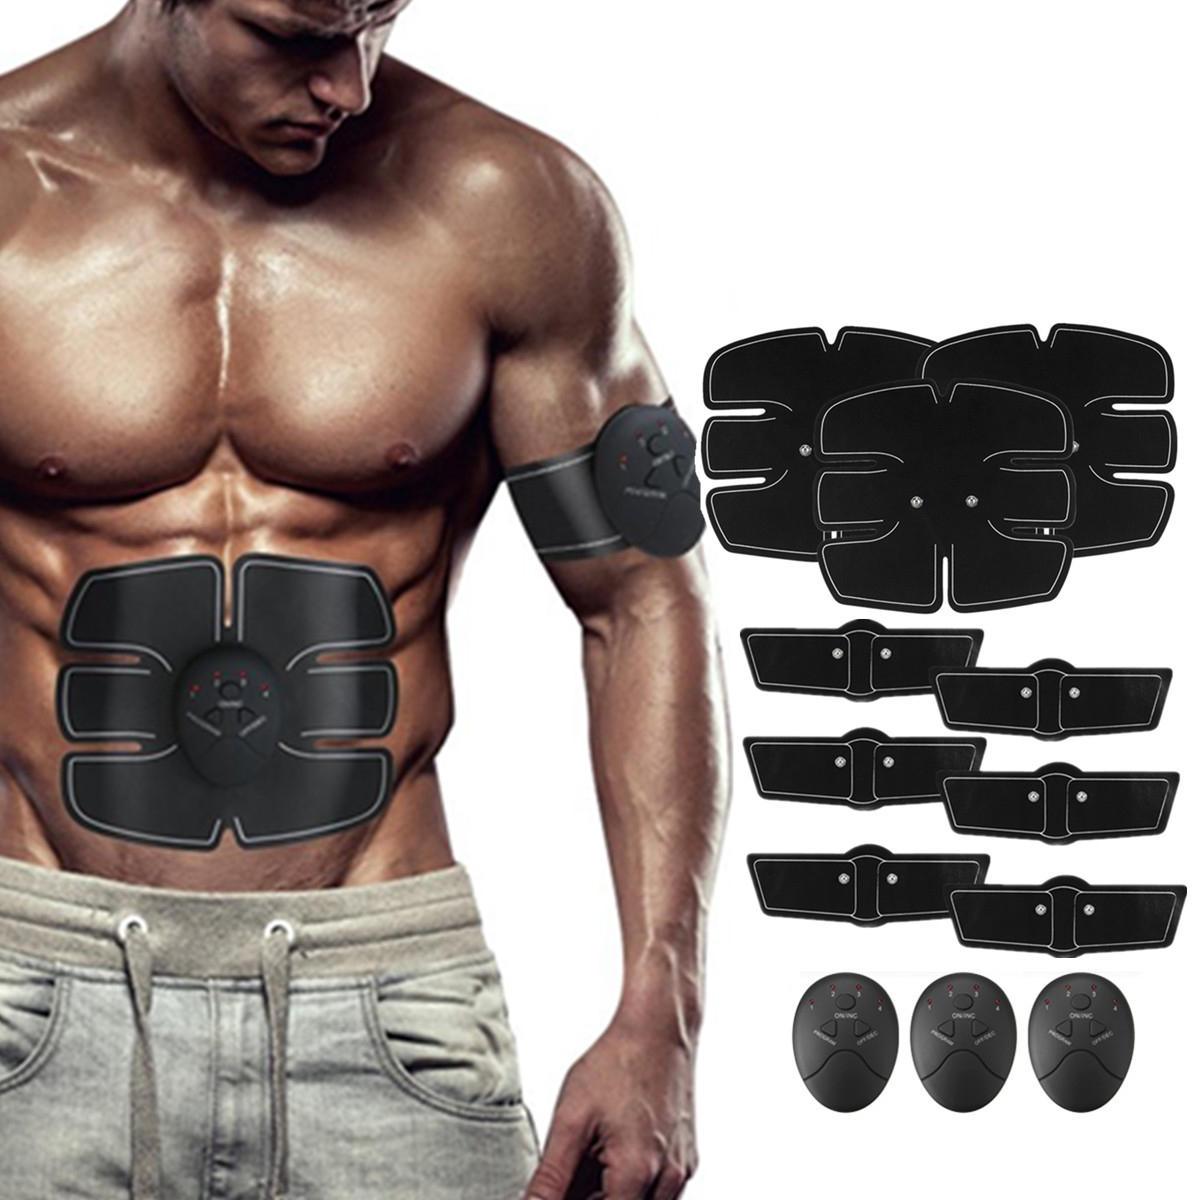 EMS Arm & Abdominal Muscle Trainer - 12PCS Body Beauty ABS Stimulator ...